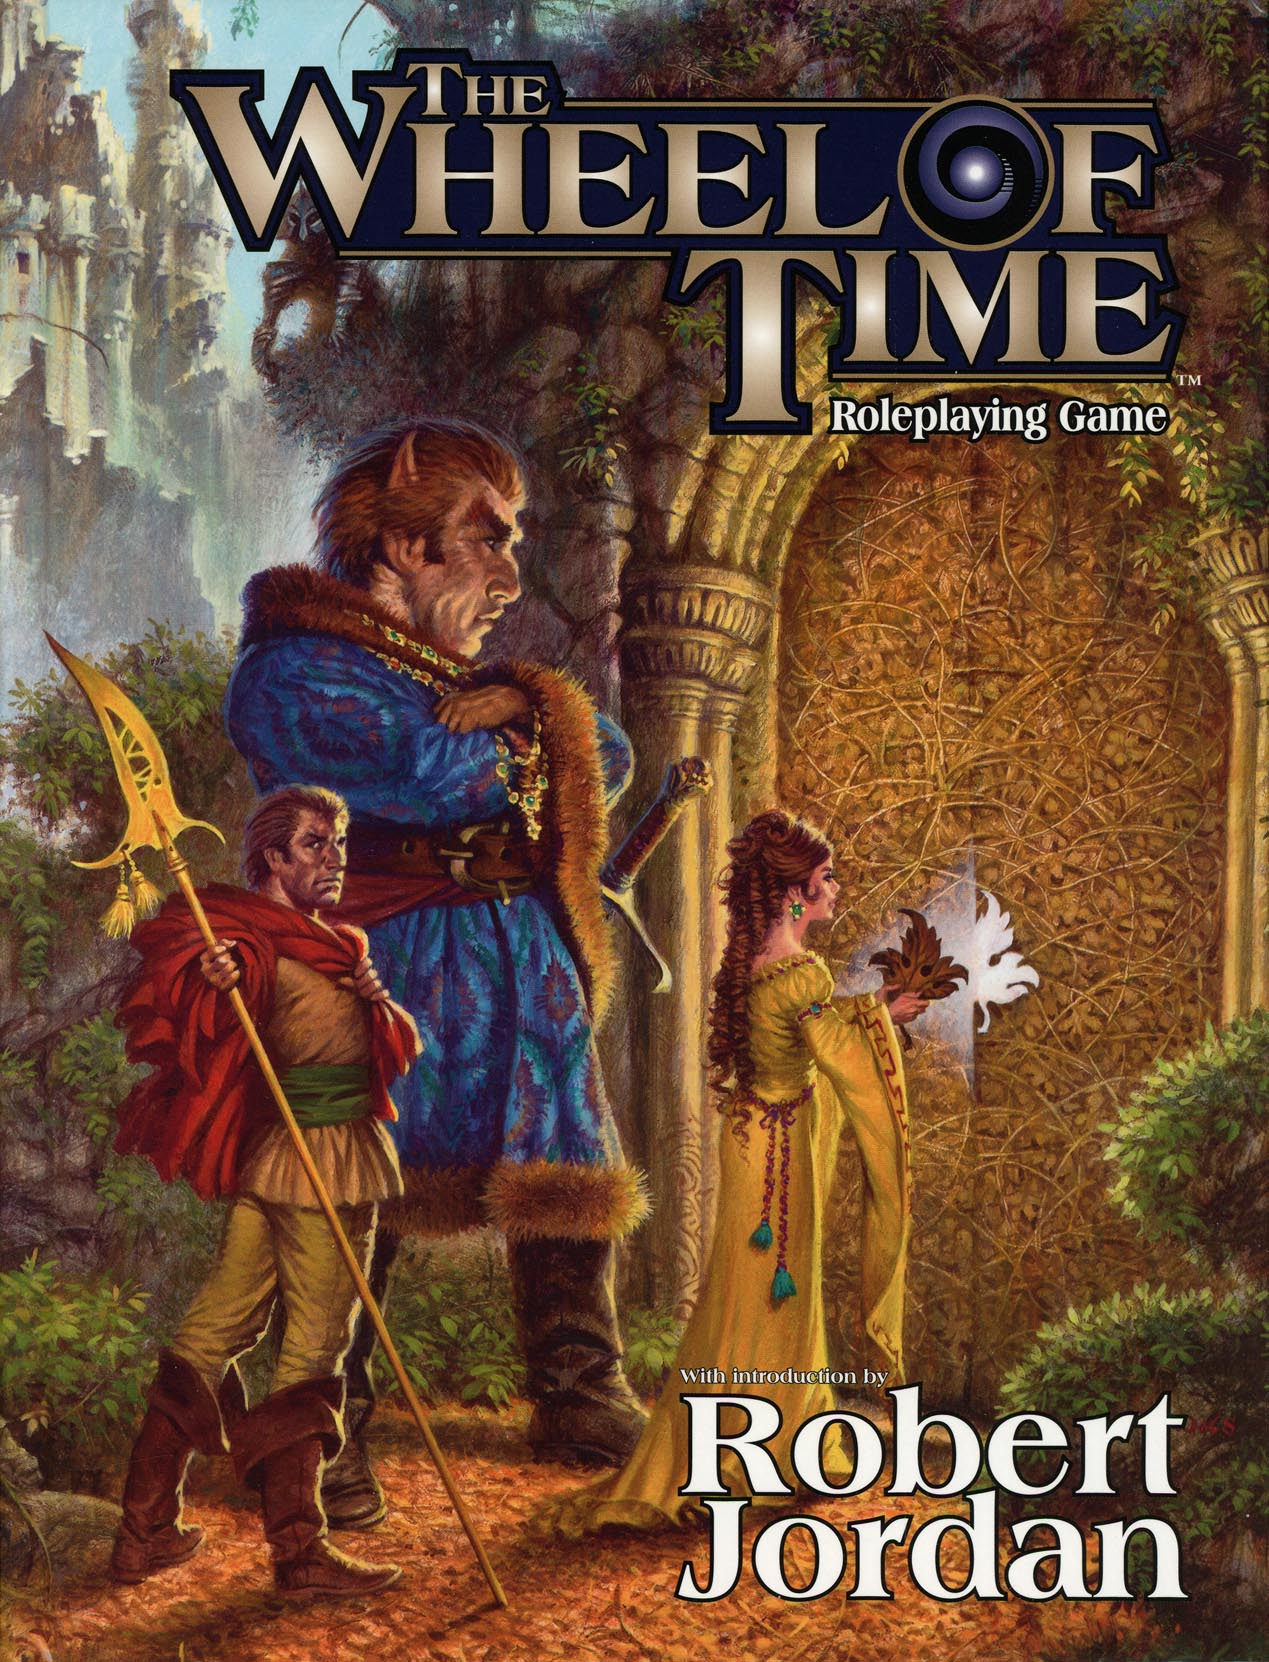 THE WHEEL OF TIME - CORE RULEBOOK - WTC11996 - RPG RELIQUARY